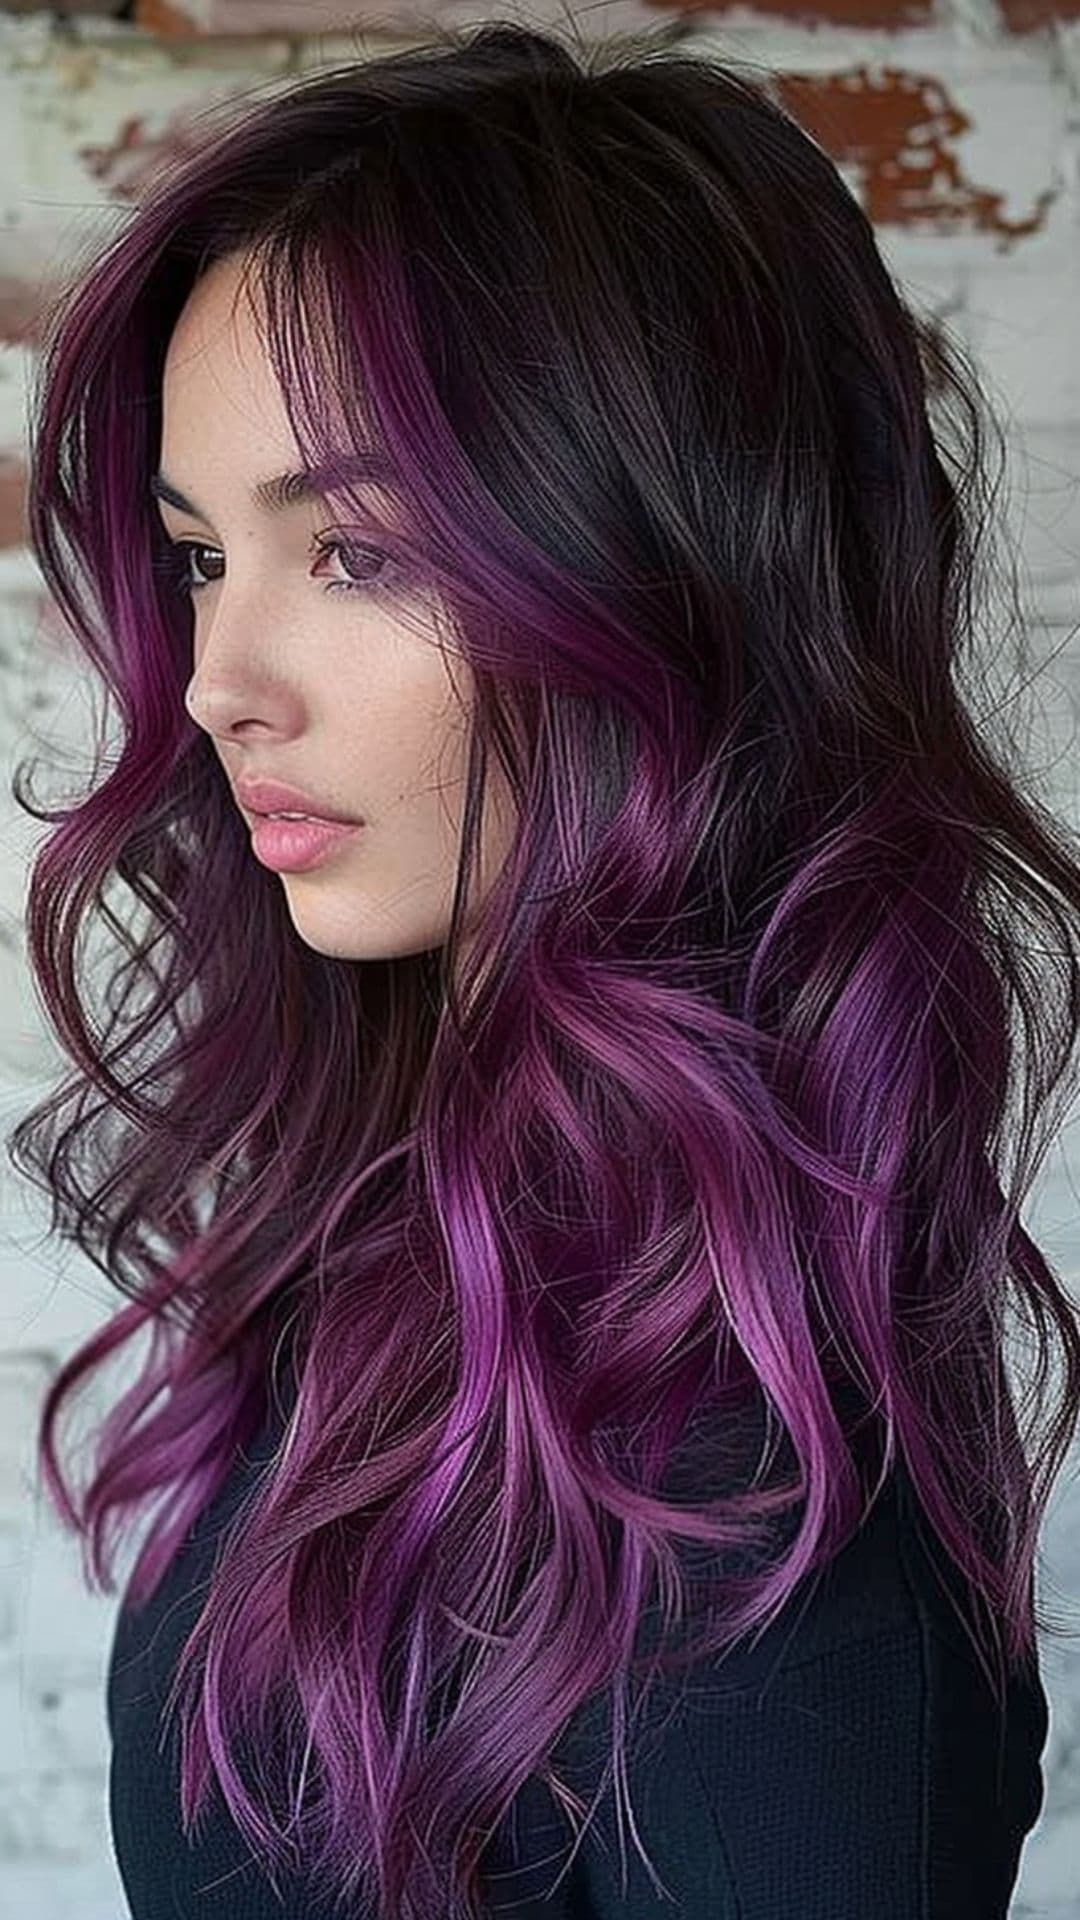 A woman modelling a berry ombre hair.